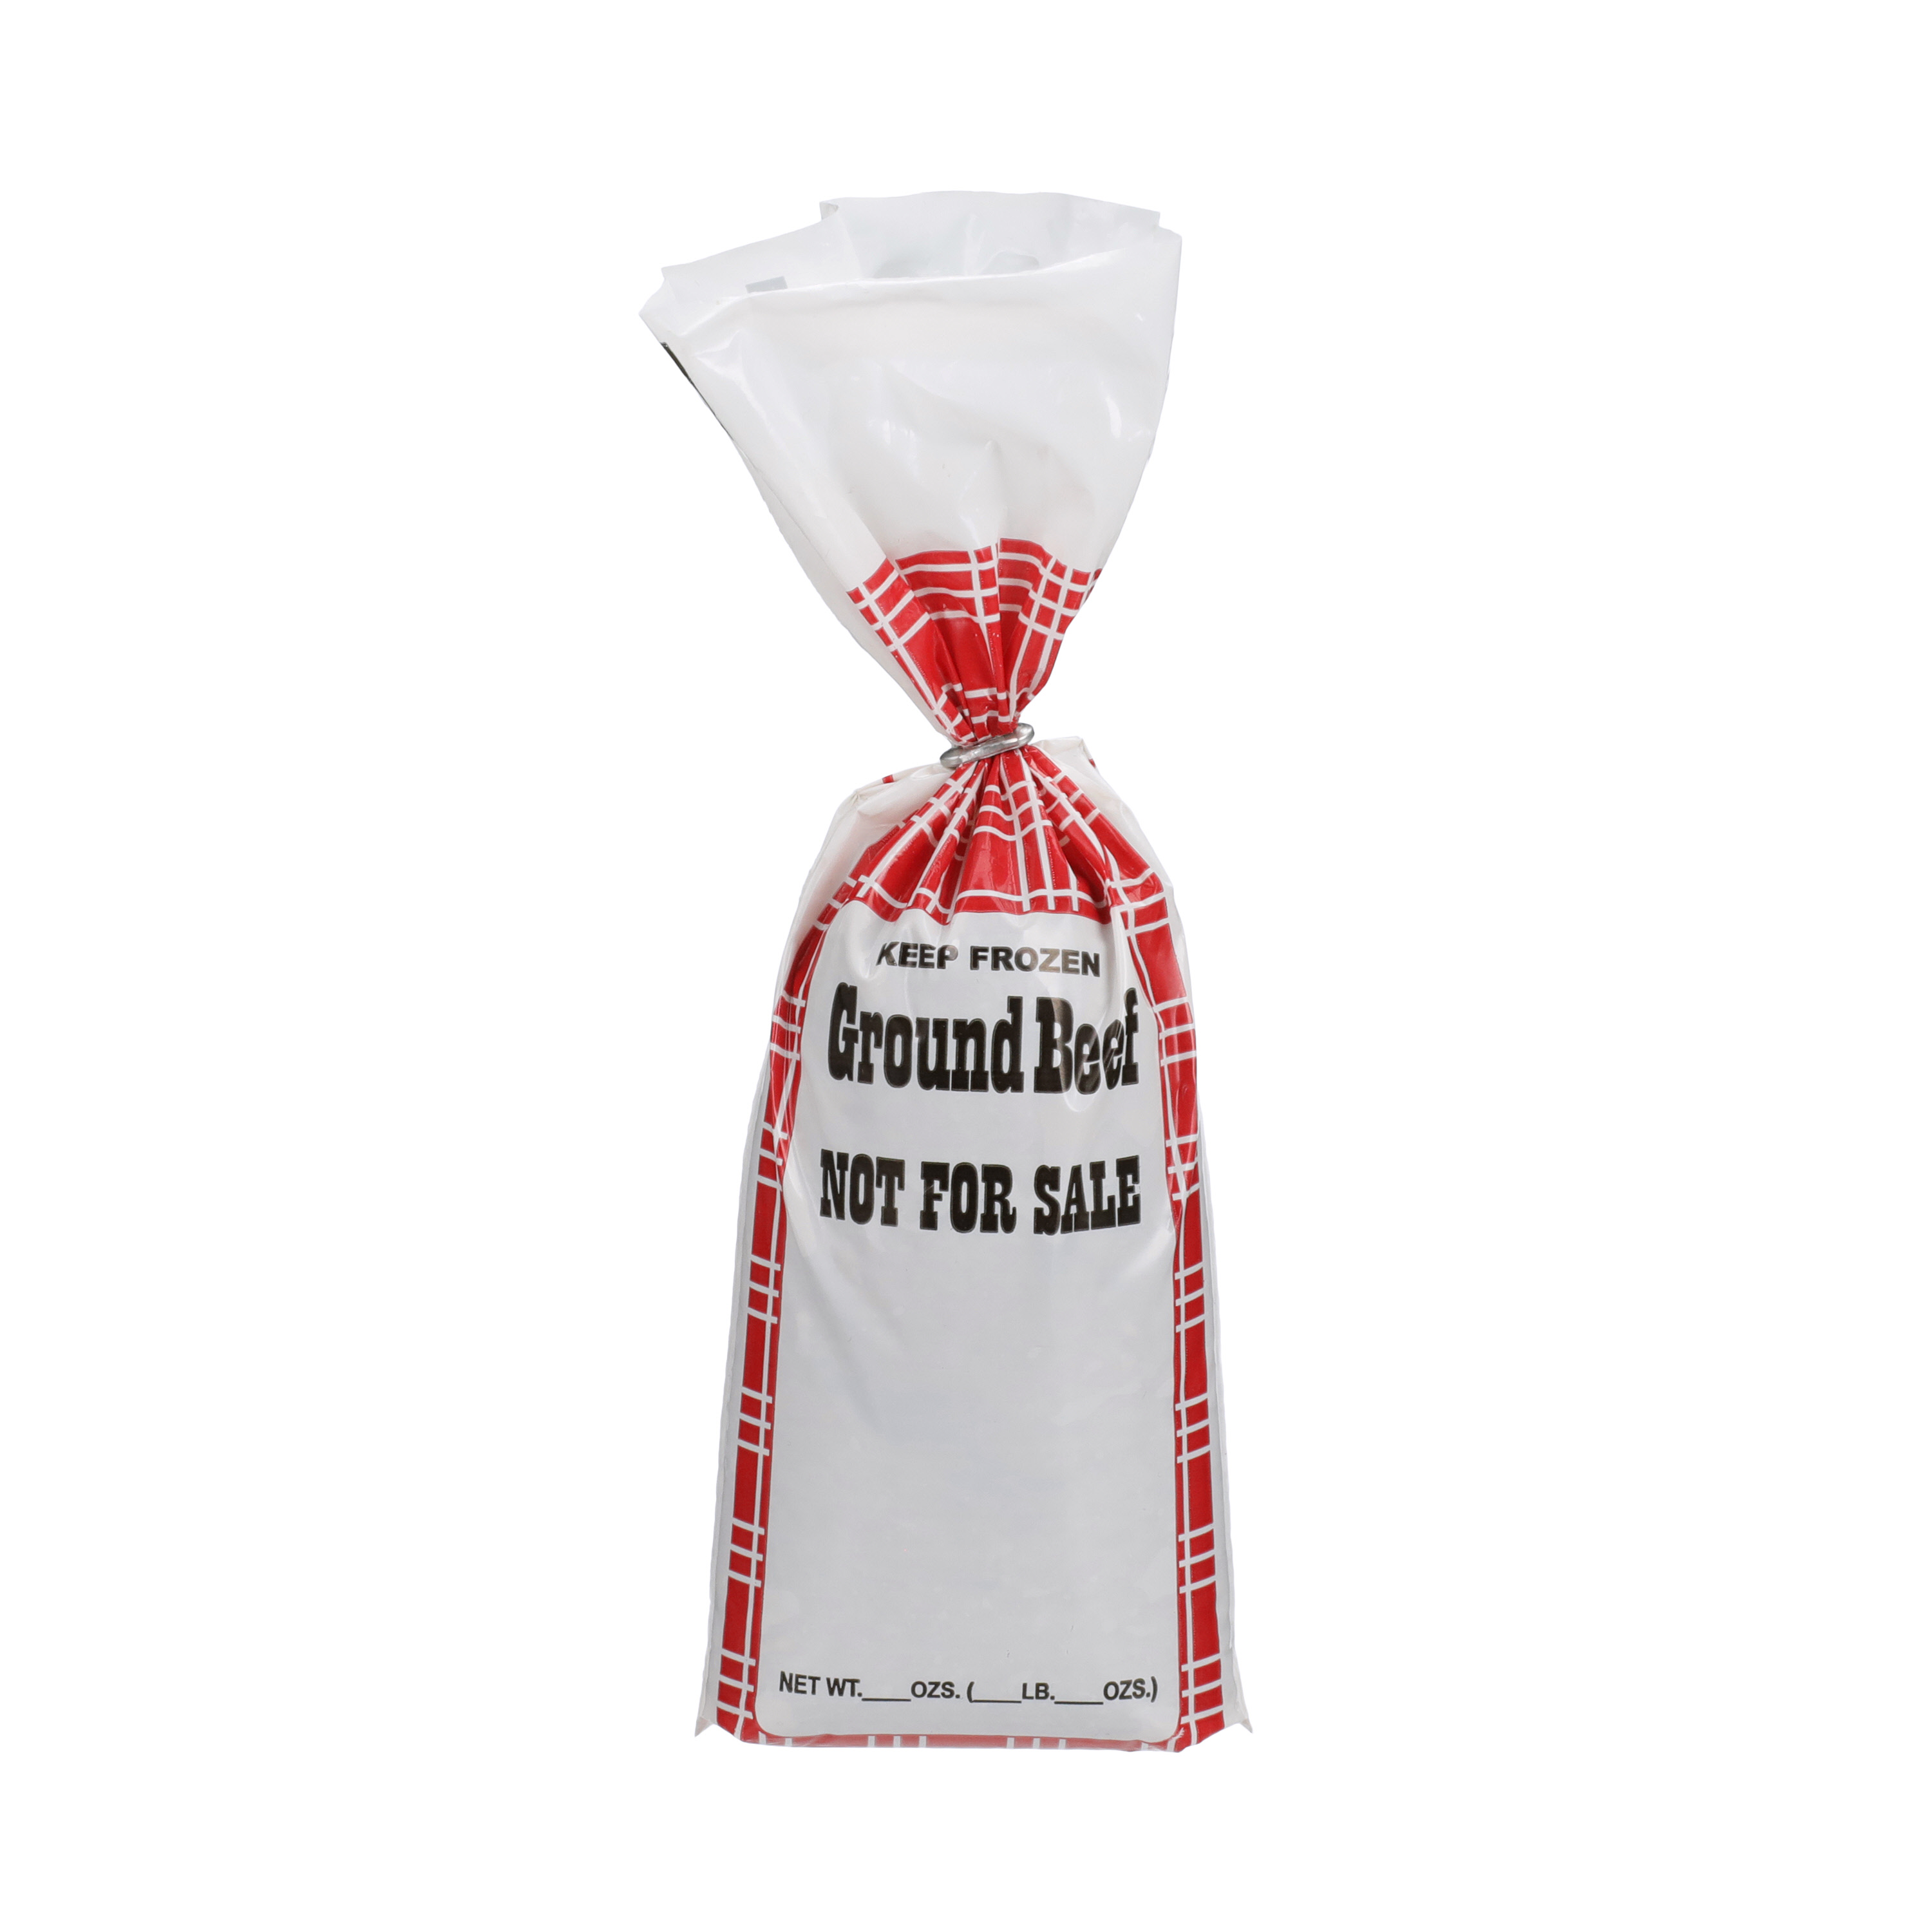 1 lb Ground Beef White Poly Meat Bags Not for Sale 1000 Count.